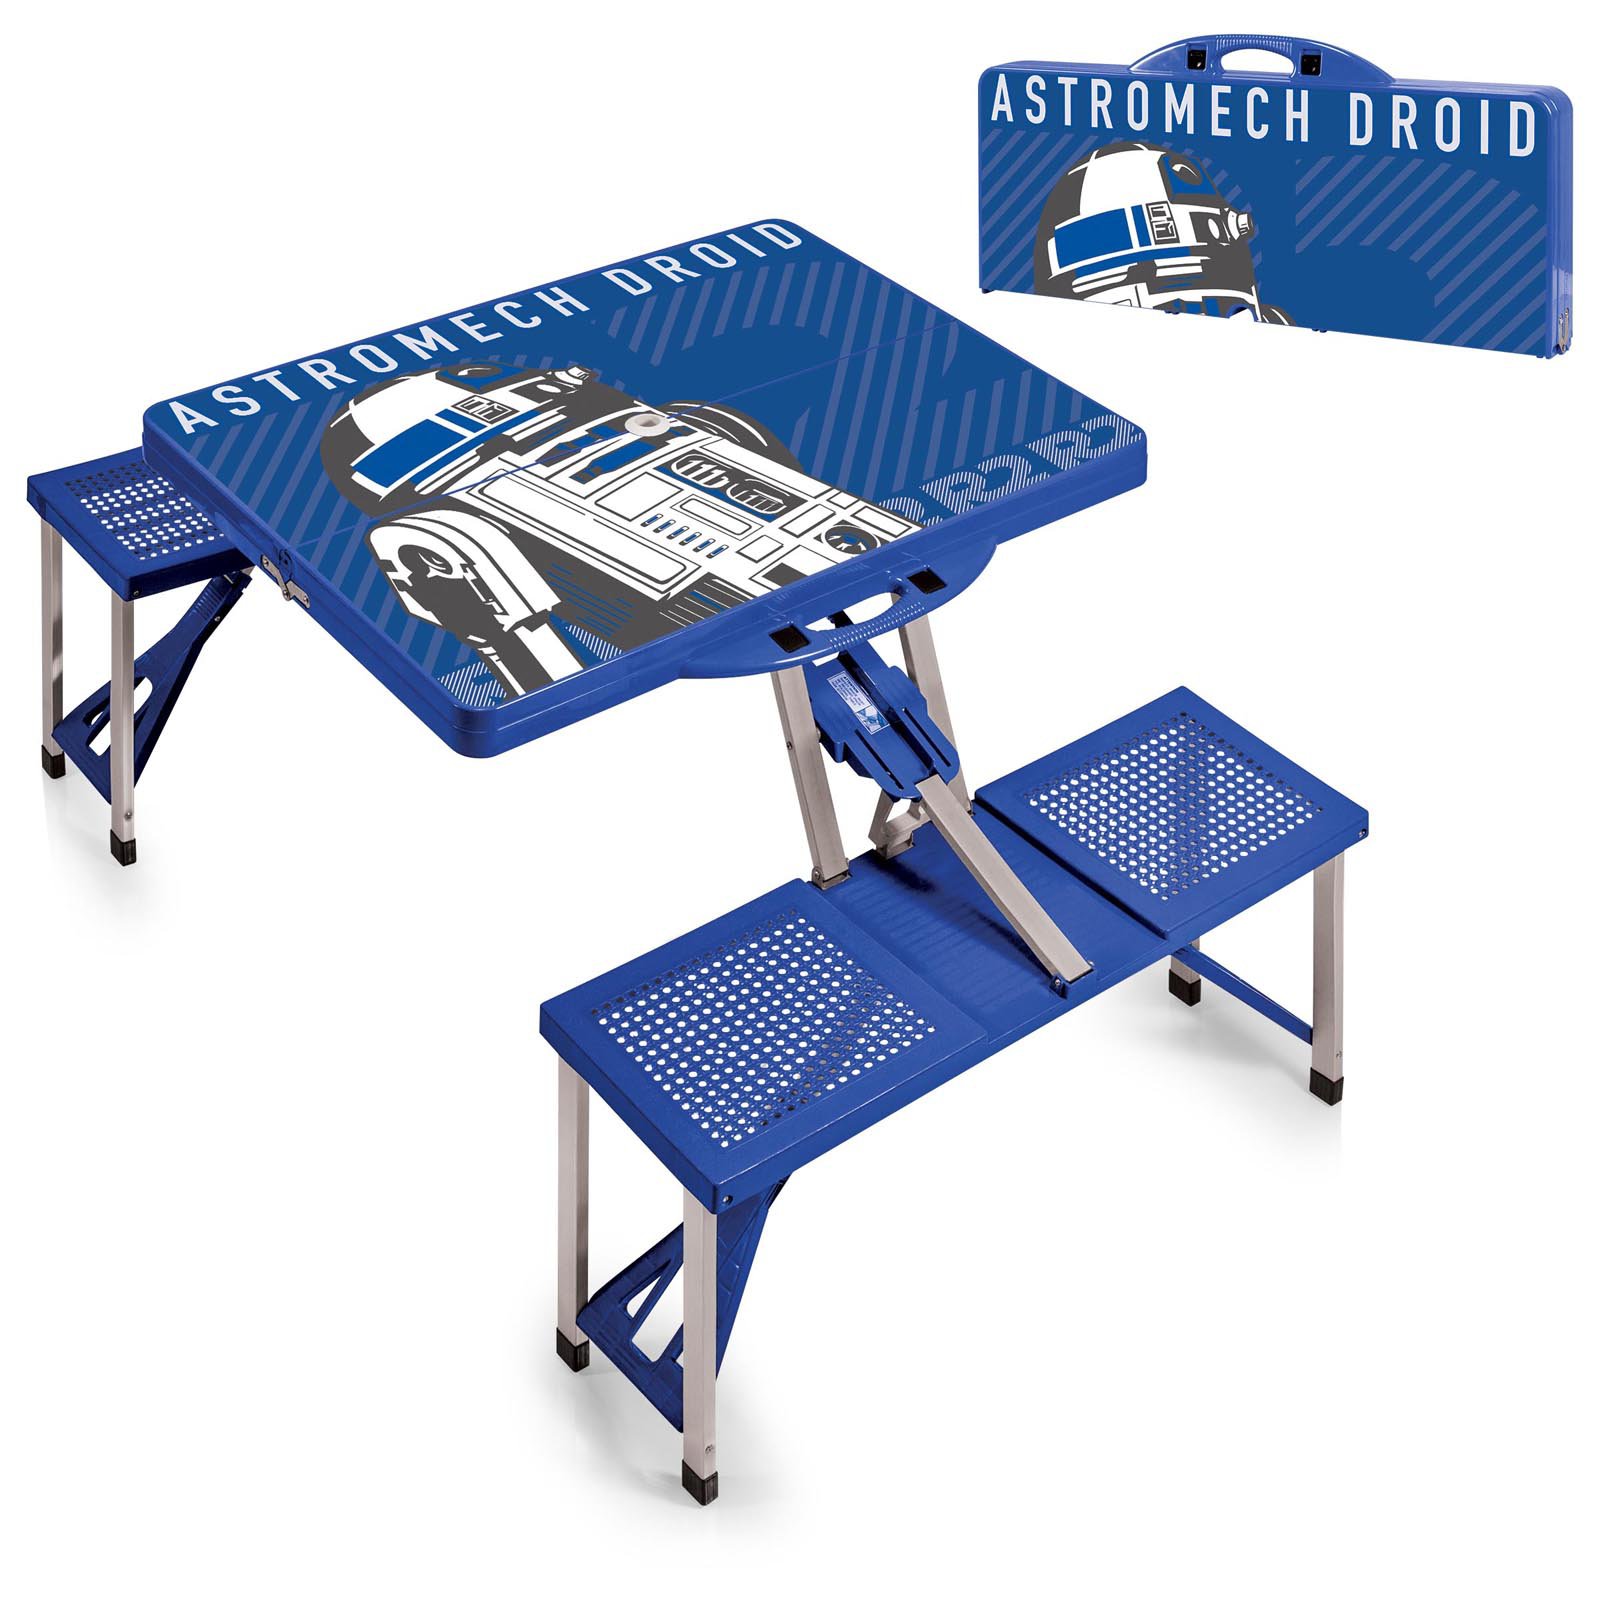 Picnic TimeStar Wars Portable Folding Table and Chair Set - image 2 of 7